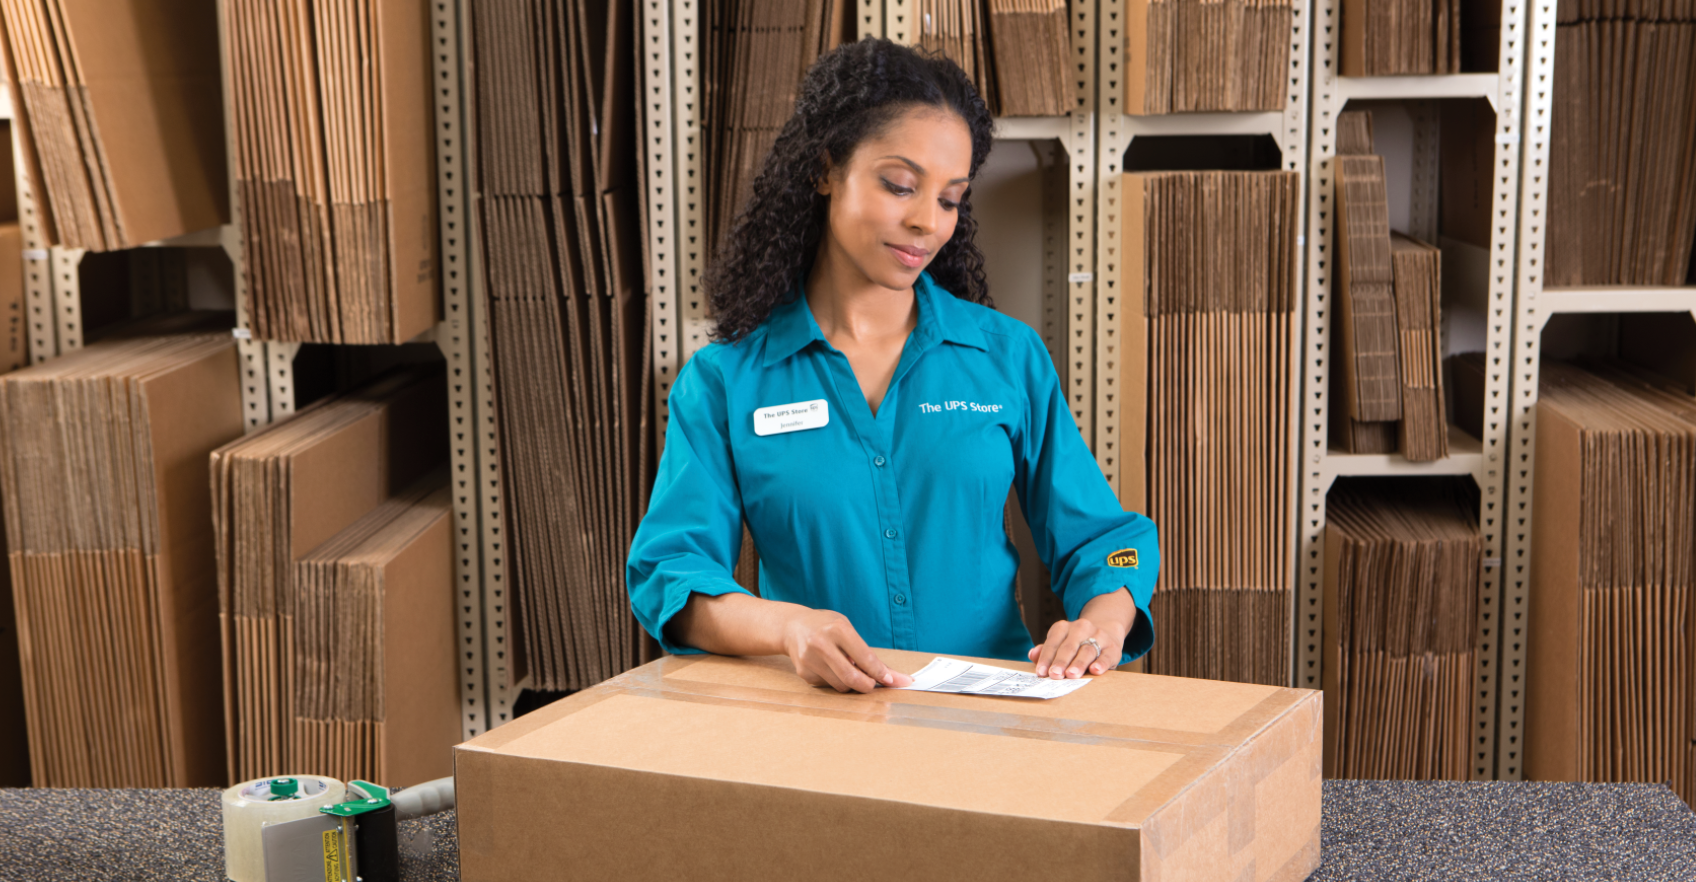 6 Tips for Decreasing Your Shipping Costs